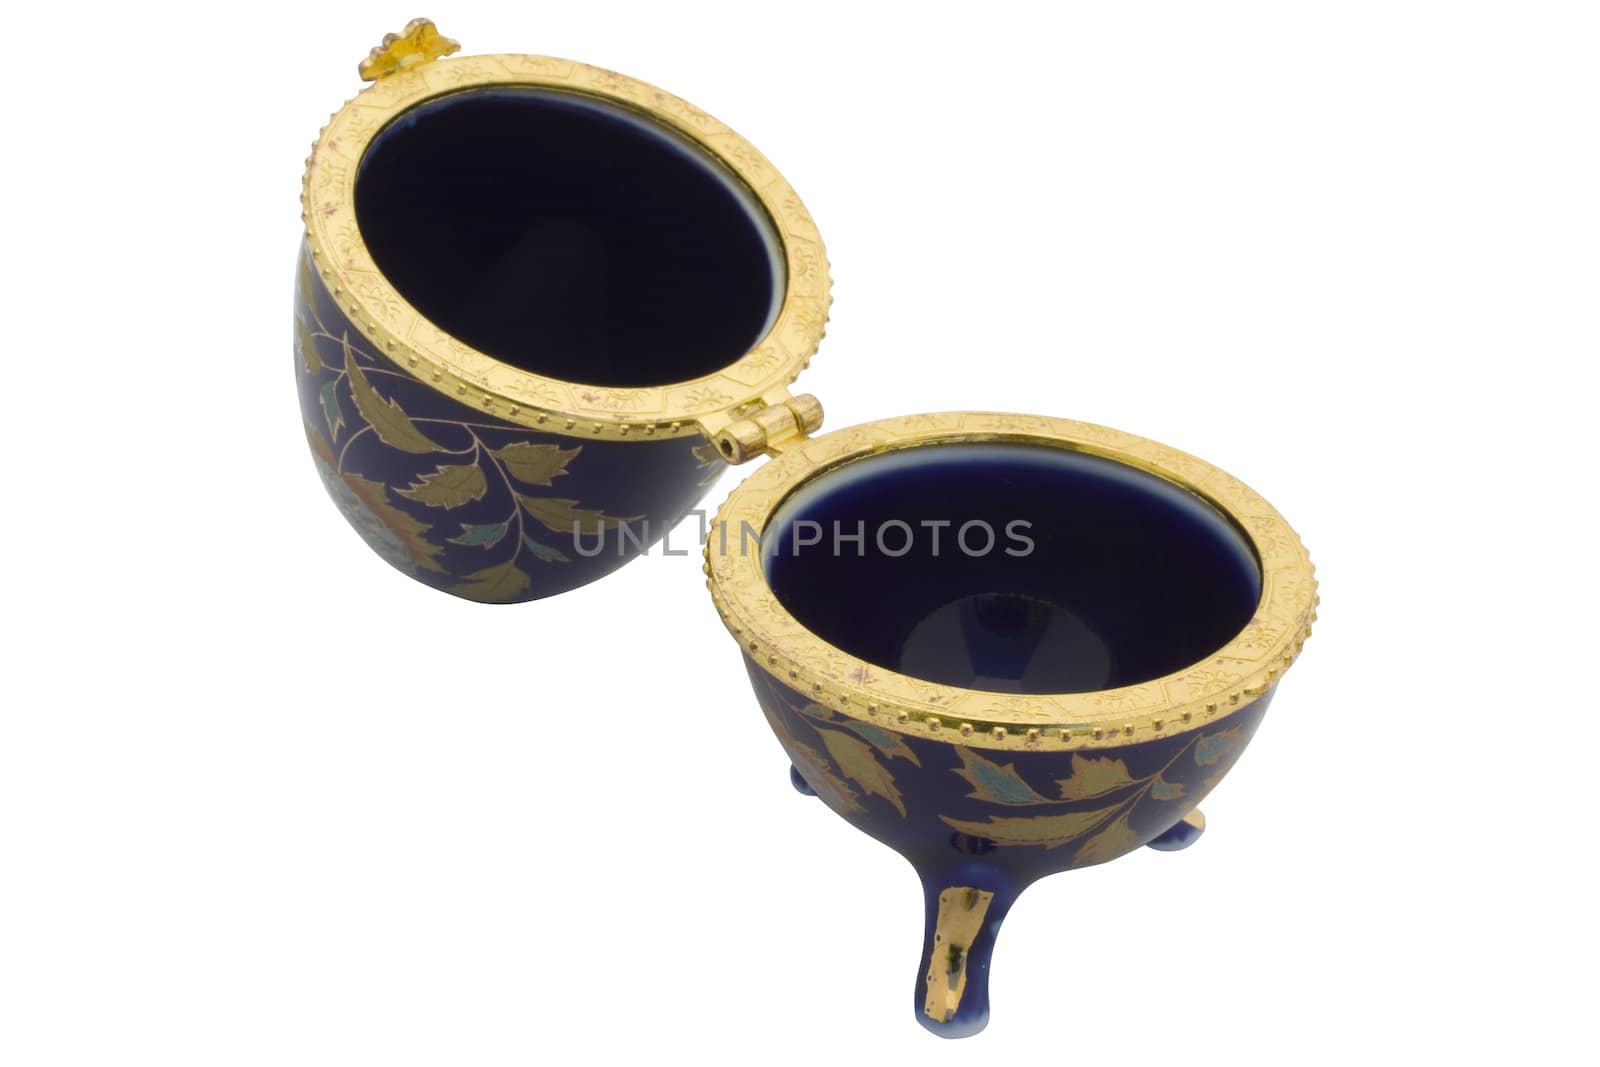 Opened ceramic casket as eggs faberge dark blue color with gold furnish it is isolated on a white background.